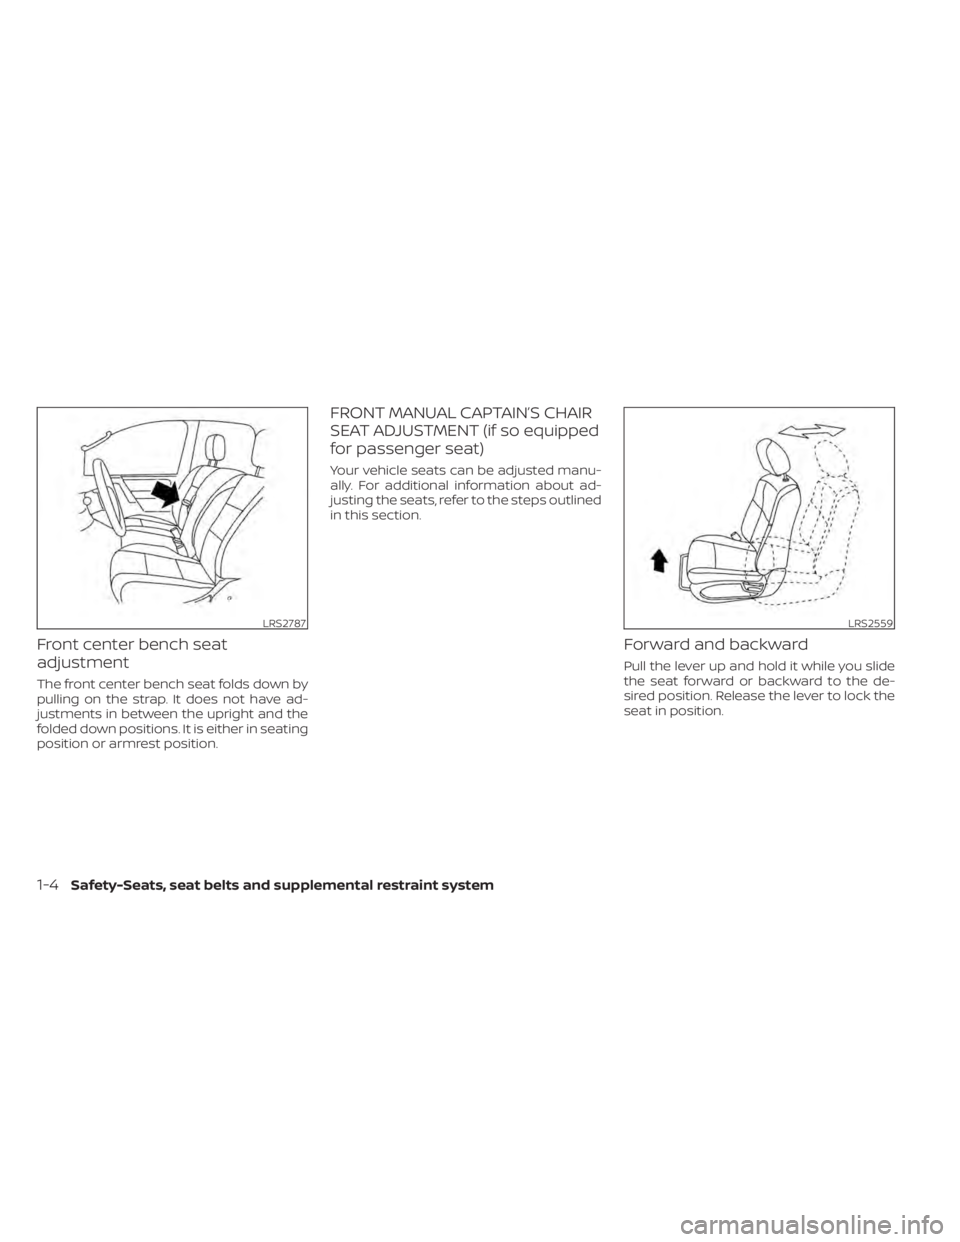 NISSAN TITAN 2021  Owner´s Manual Front center bench seat
adjustment
The front center bench seat folds down by
pulling on the strap. It does not have ad-
justments in between the upright and the
folded down positions. It is either in 